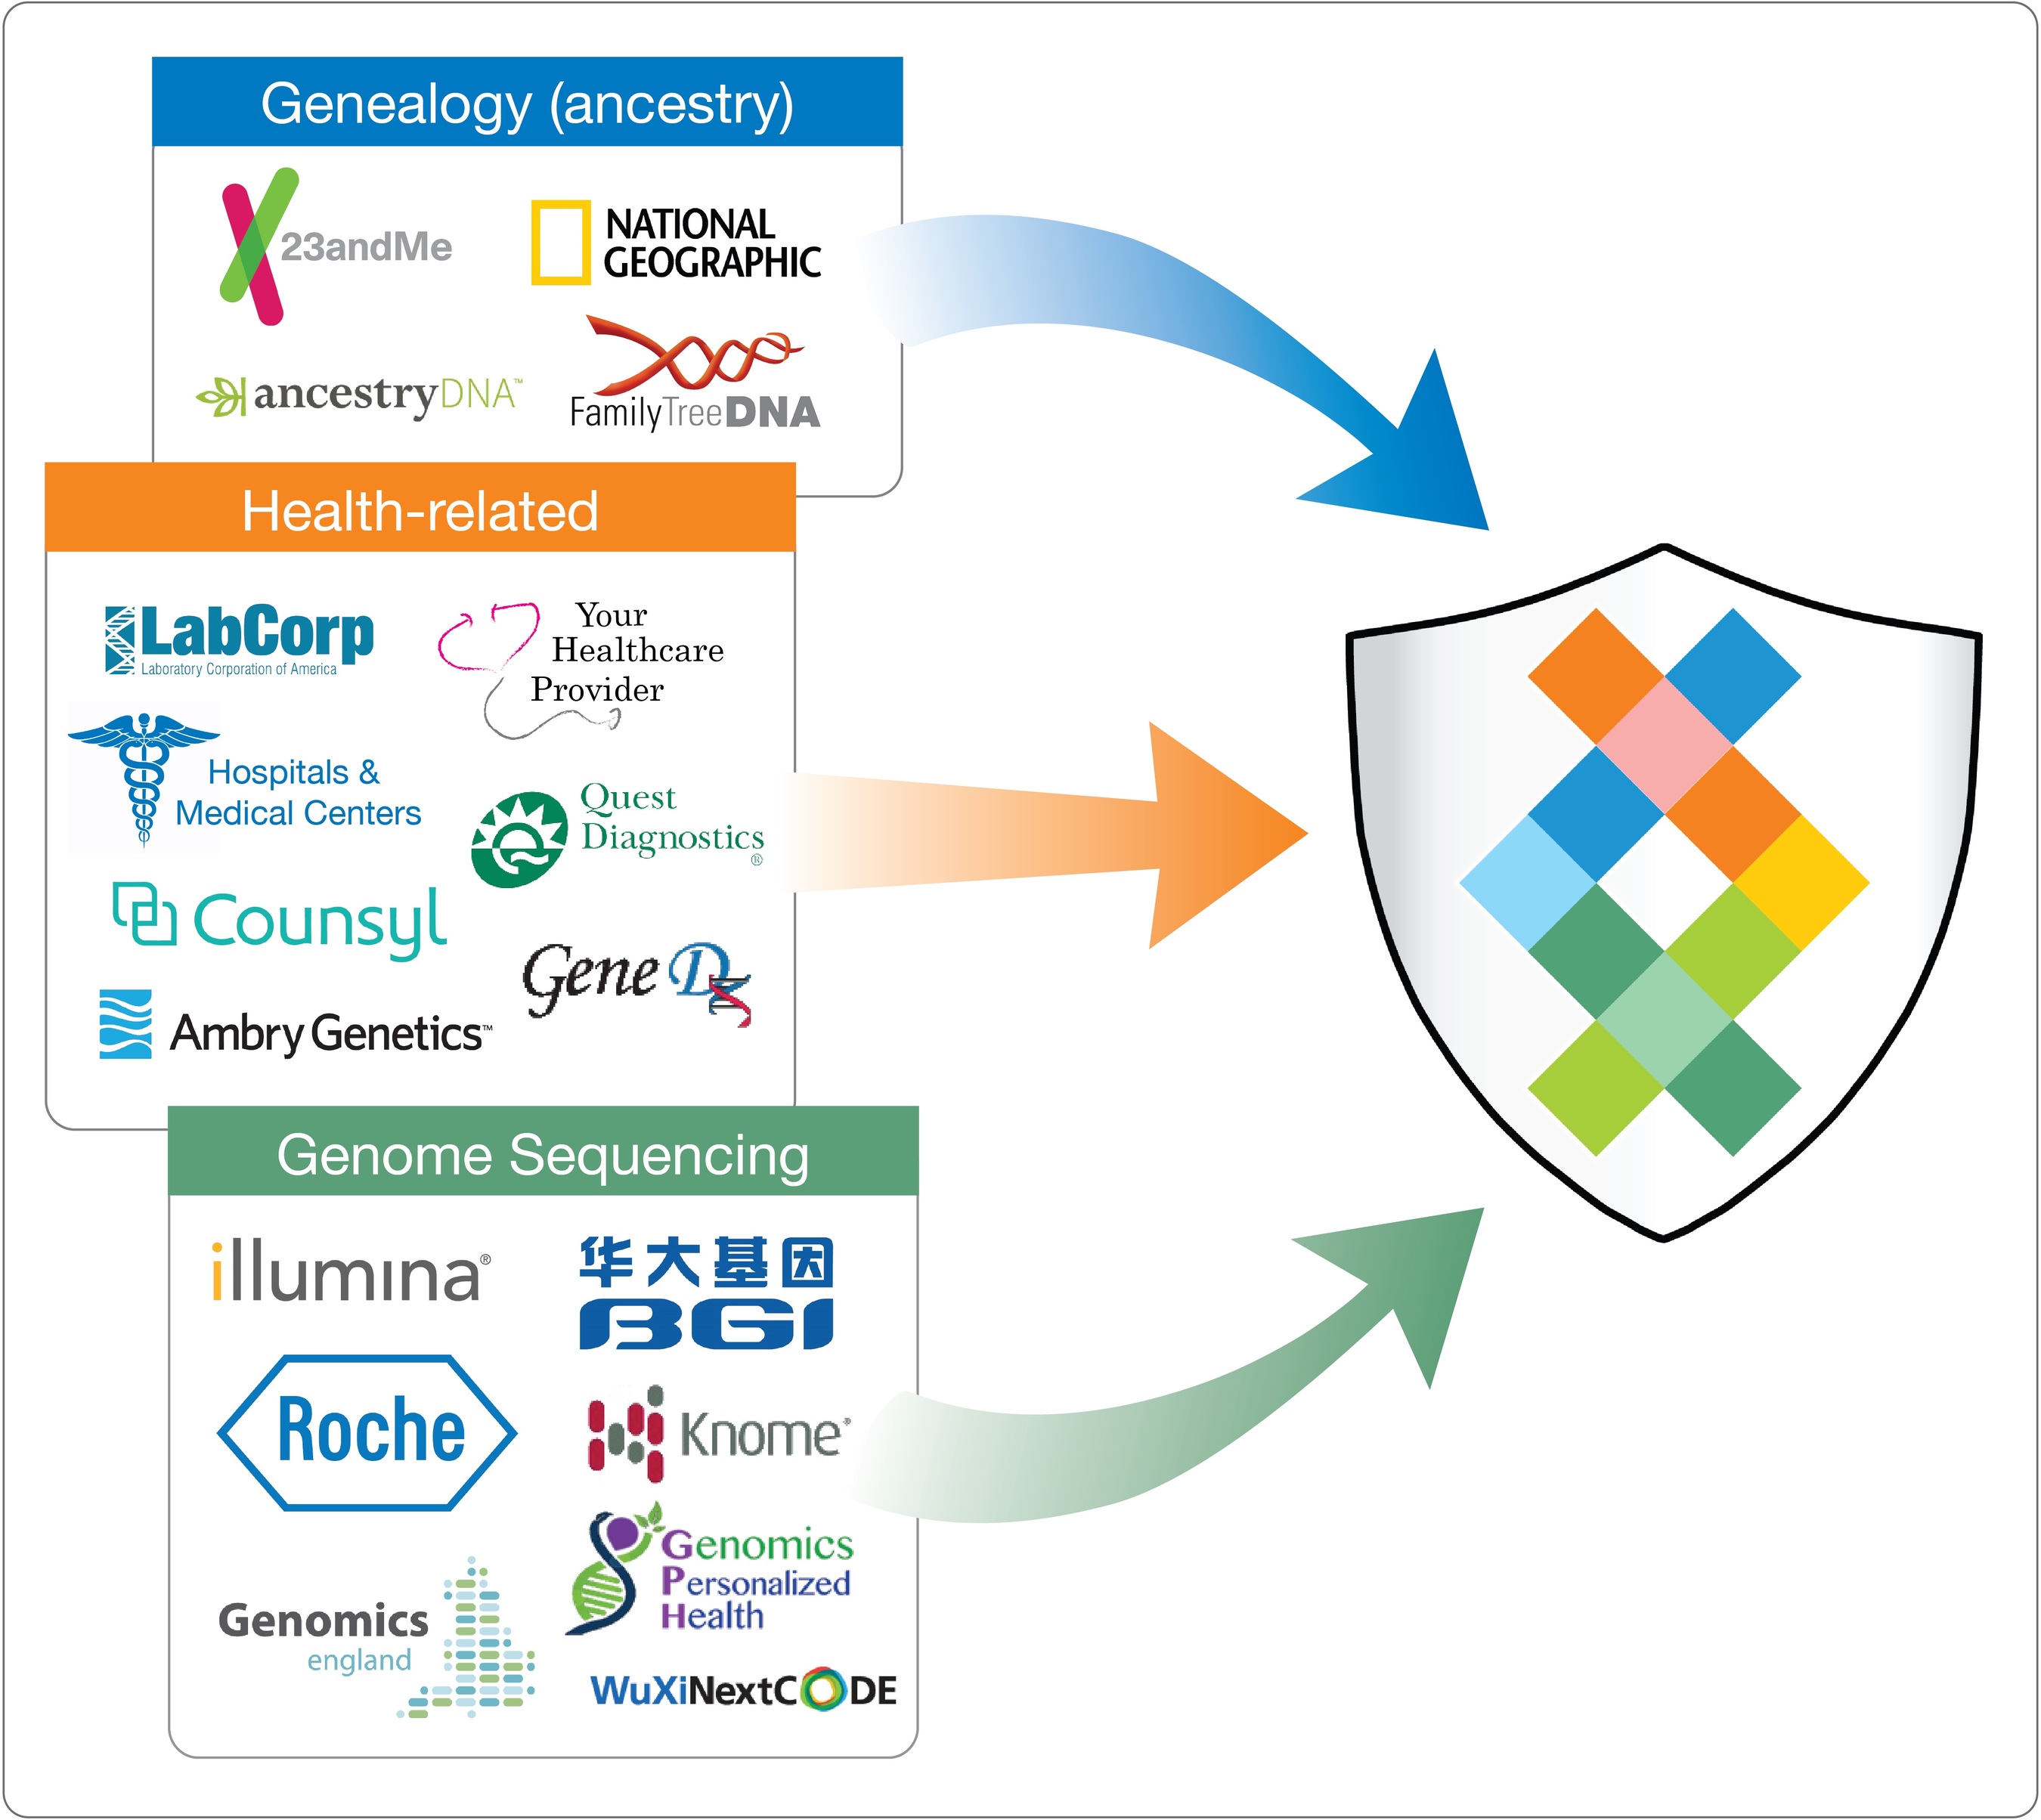 Sequencing.com is compatible with the genetic data produced by all testing technologies and companies